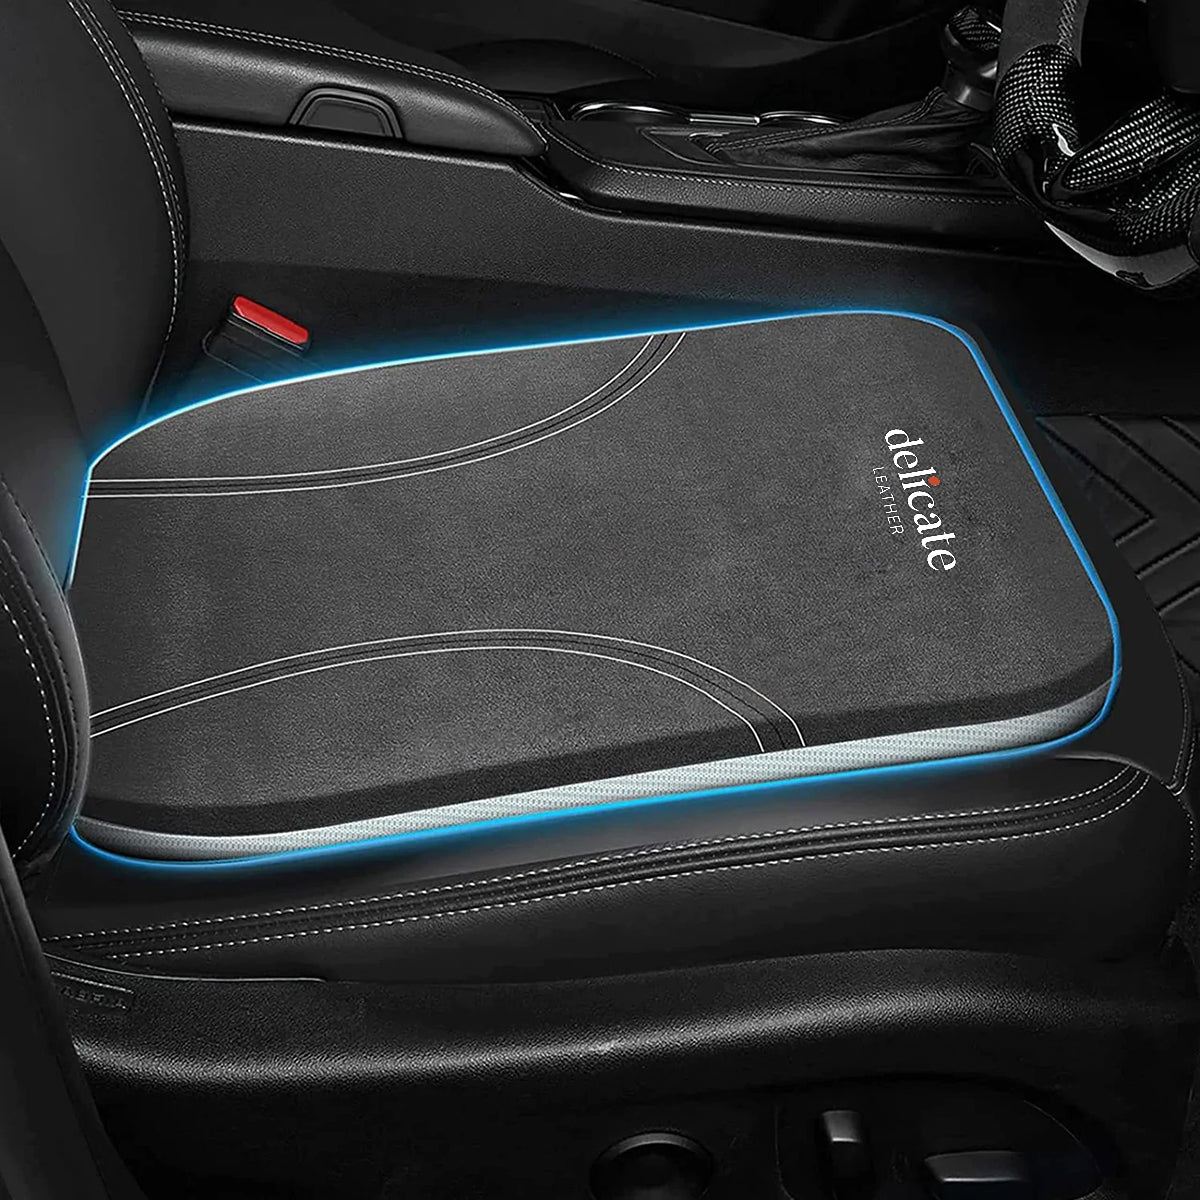 Mitsubishi Car Seat Cushion: Enhance Comfort and Support for Your Drive